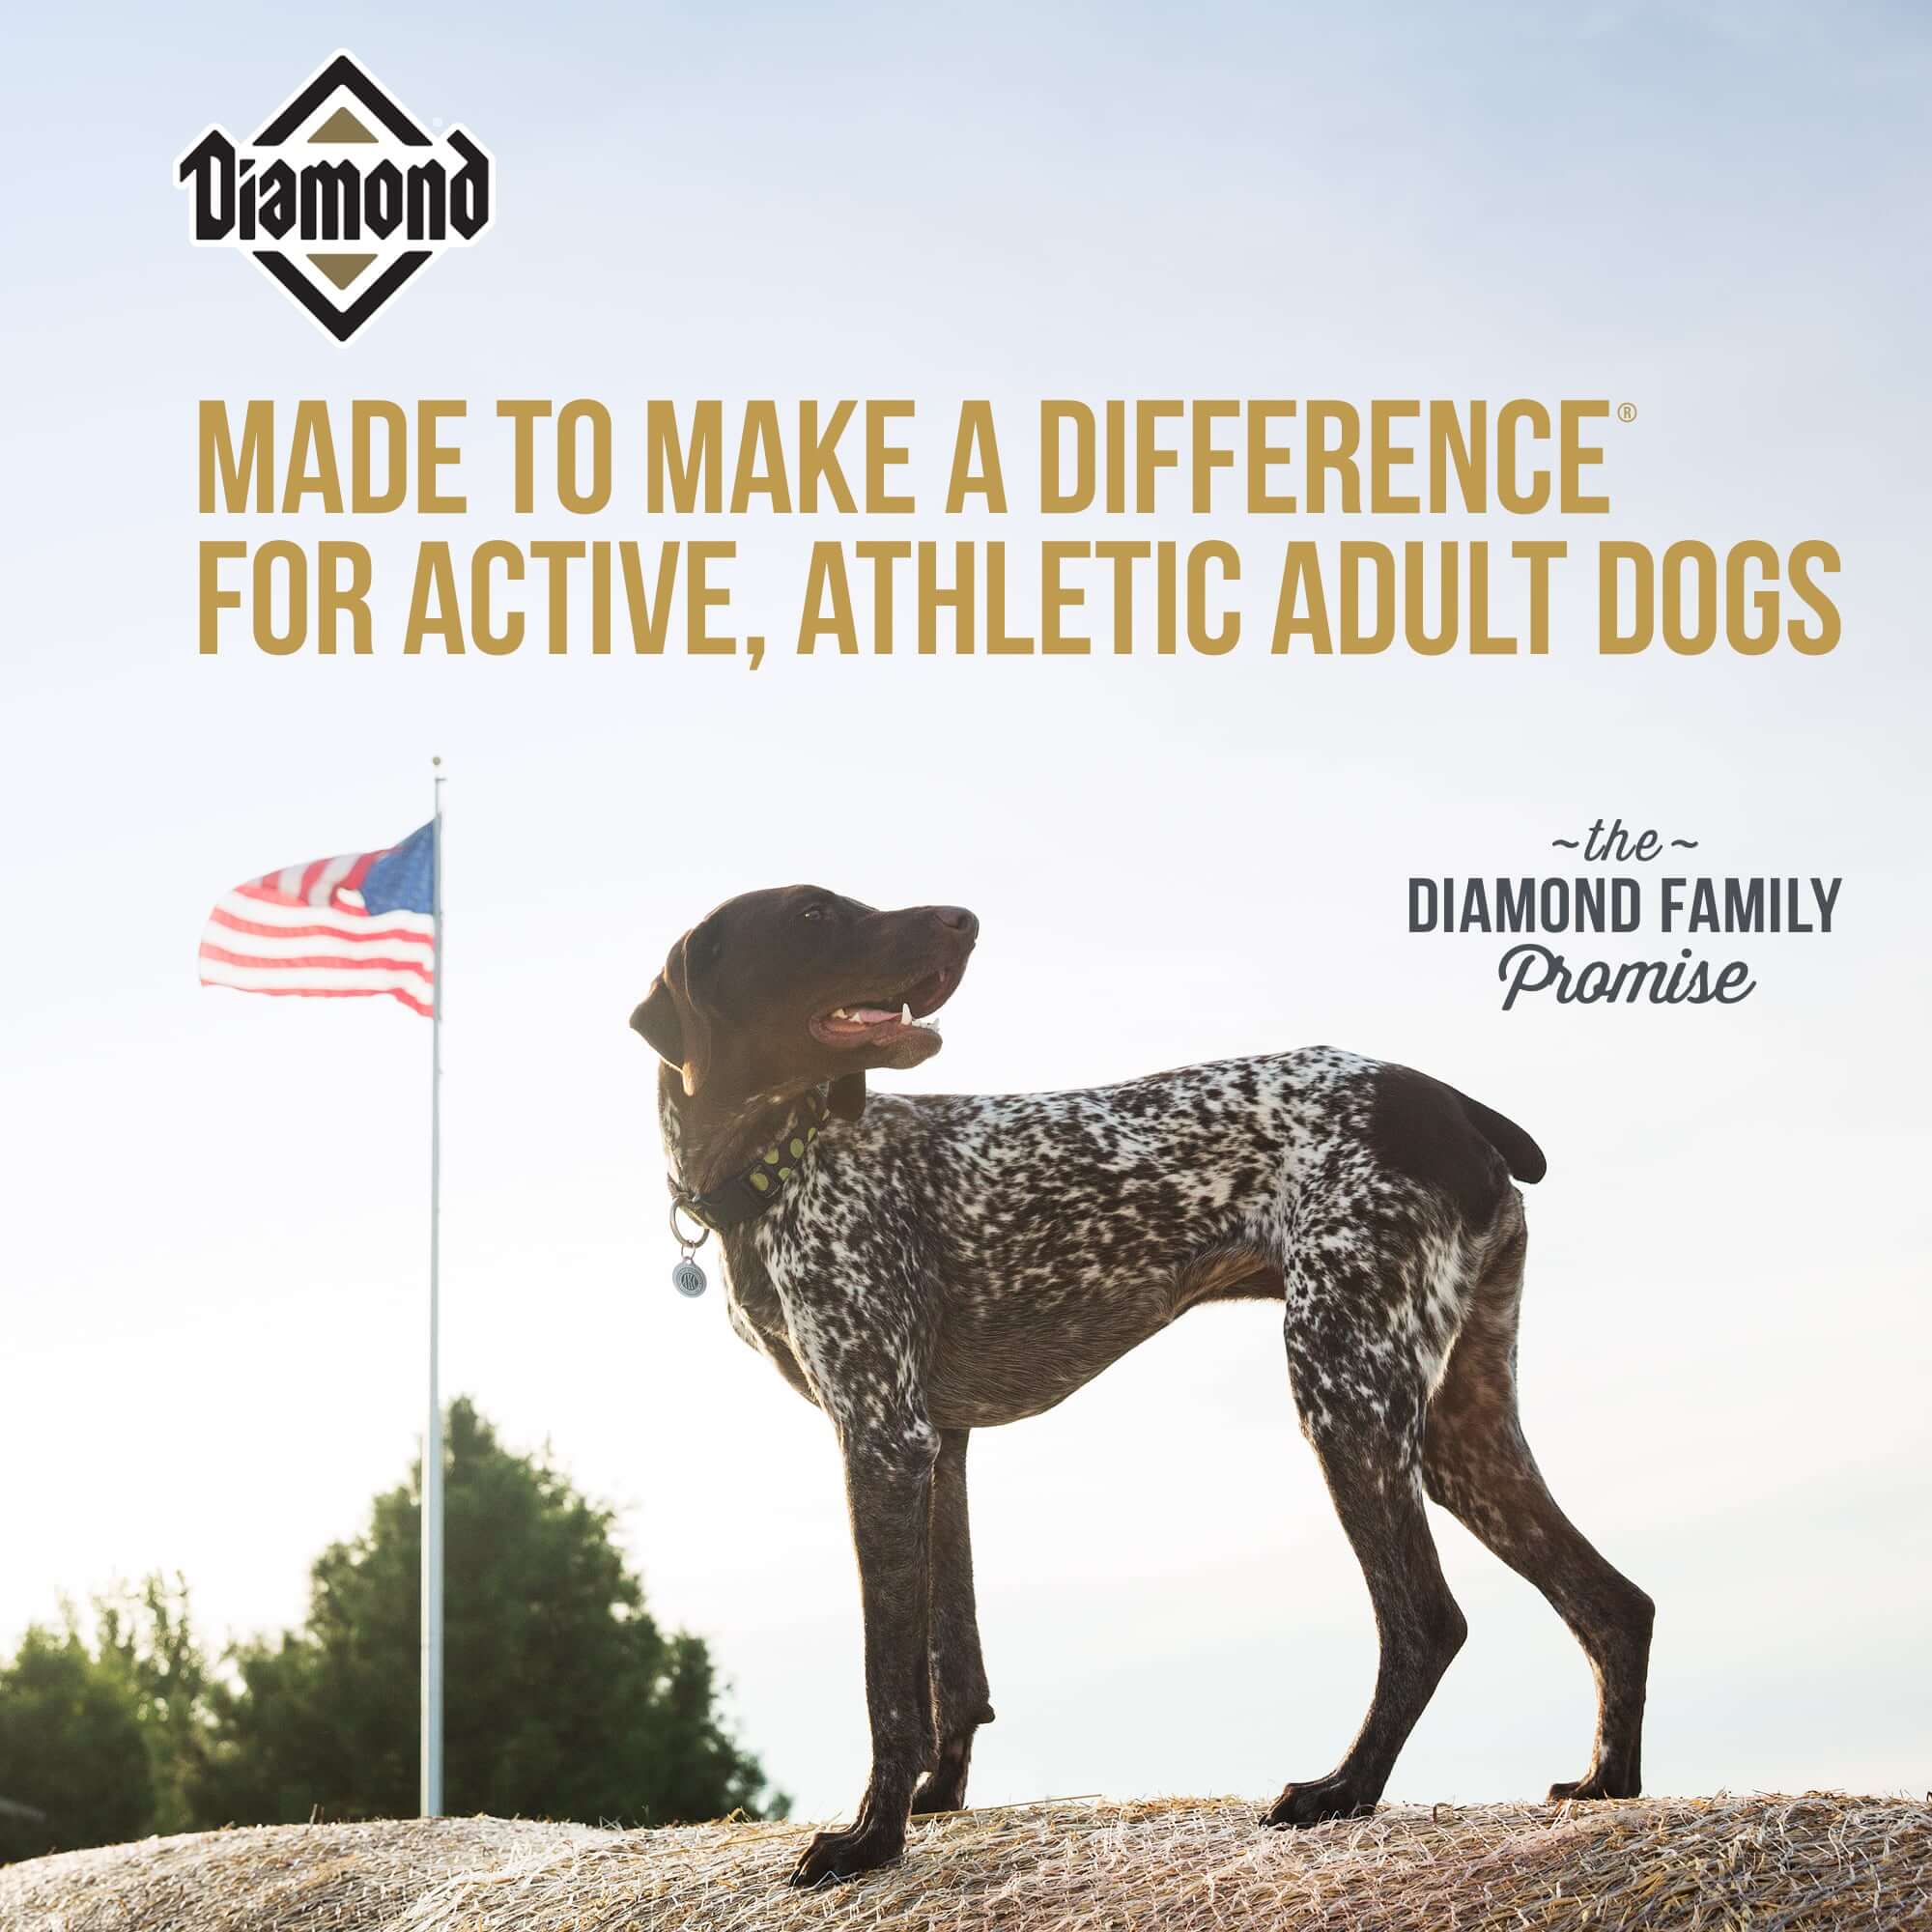 Made to make a difference for highly active sporting dogs